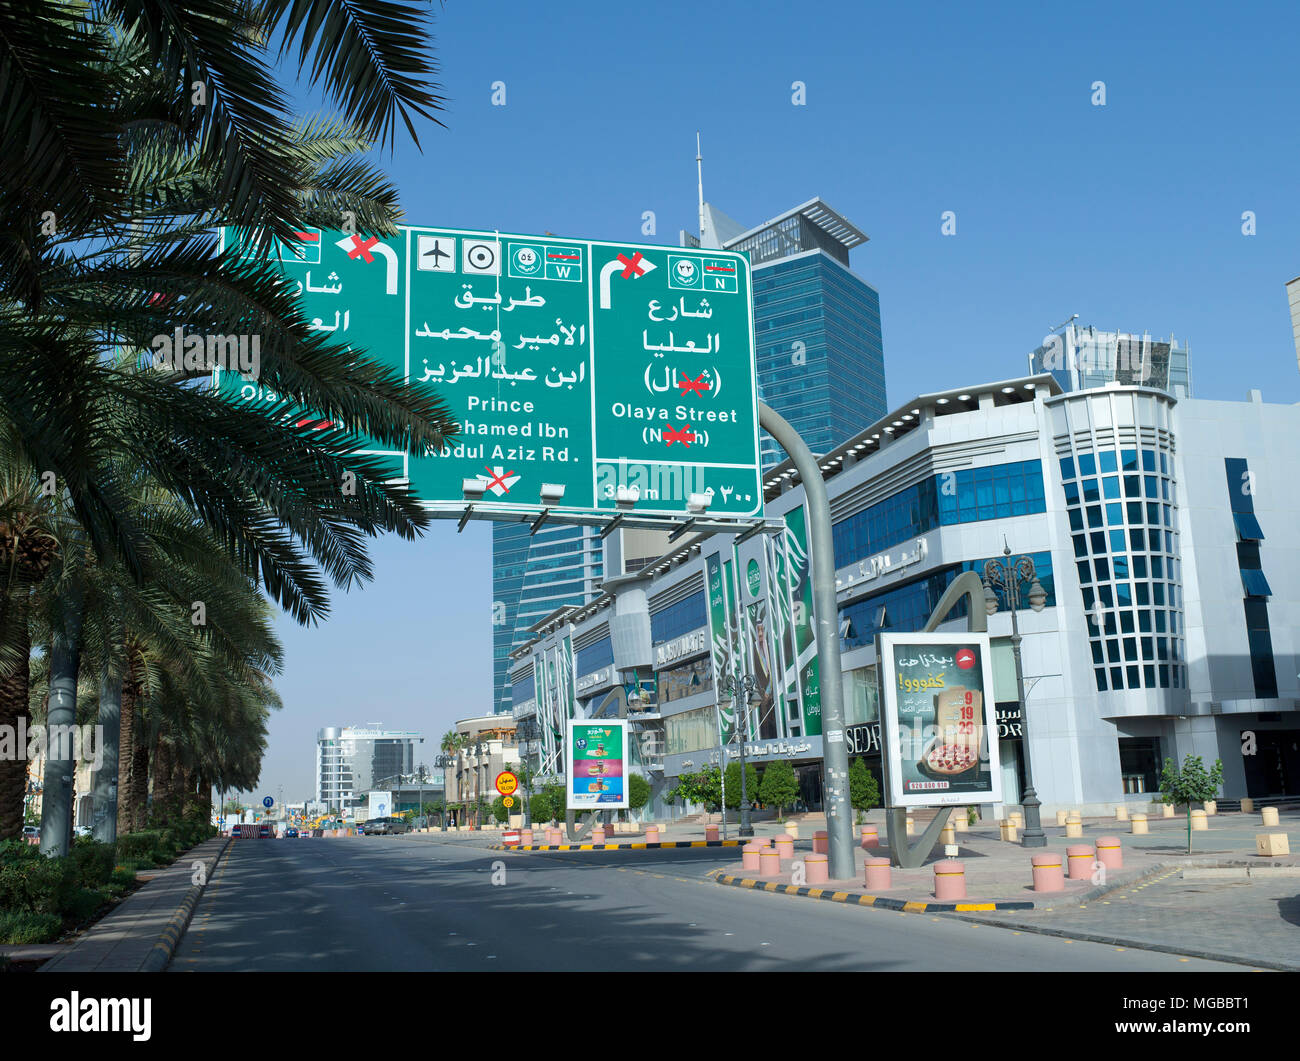 Mandatory Re-routing Sign Caused By Metro Construction on Olaya and Tahlia Street Cross Roads In Riyadh, Saudi Arabia, 26-04-2018 Stock Photo